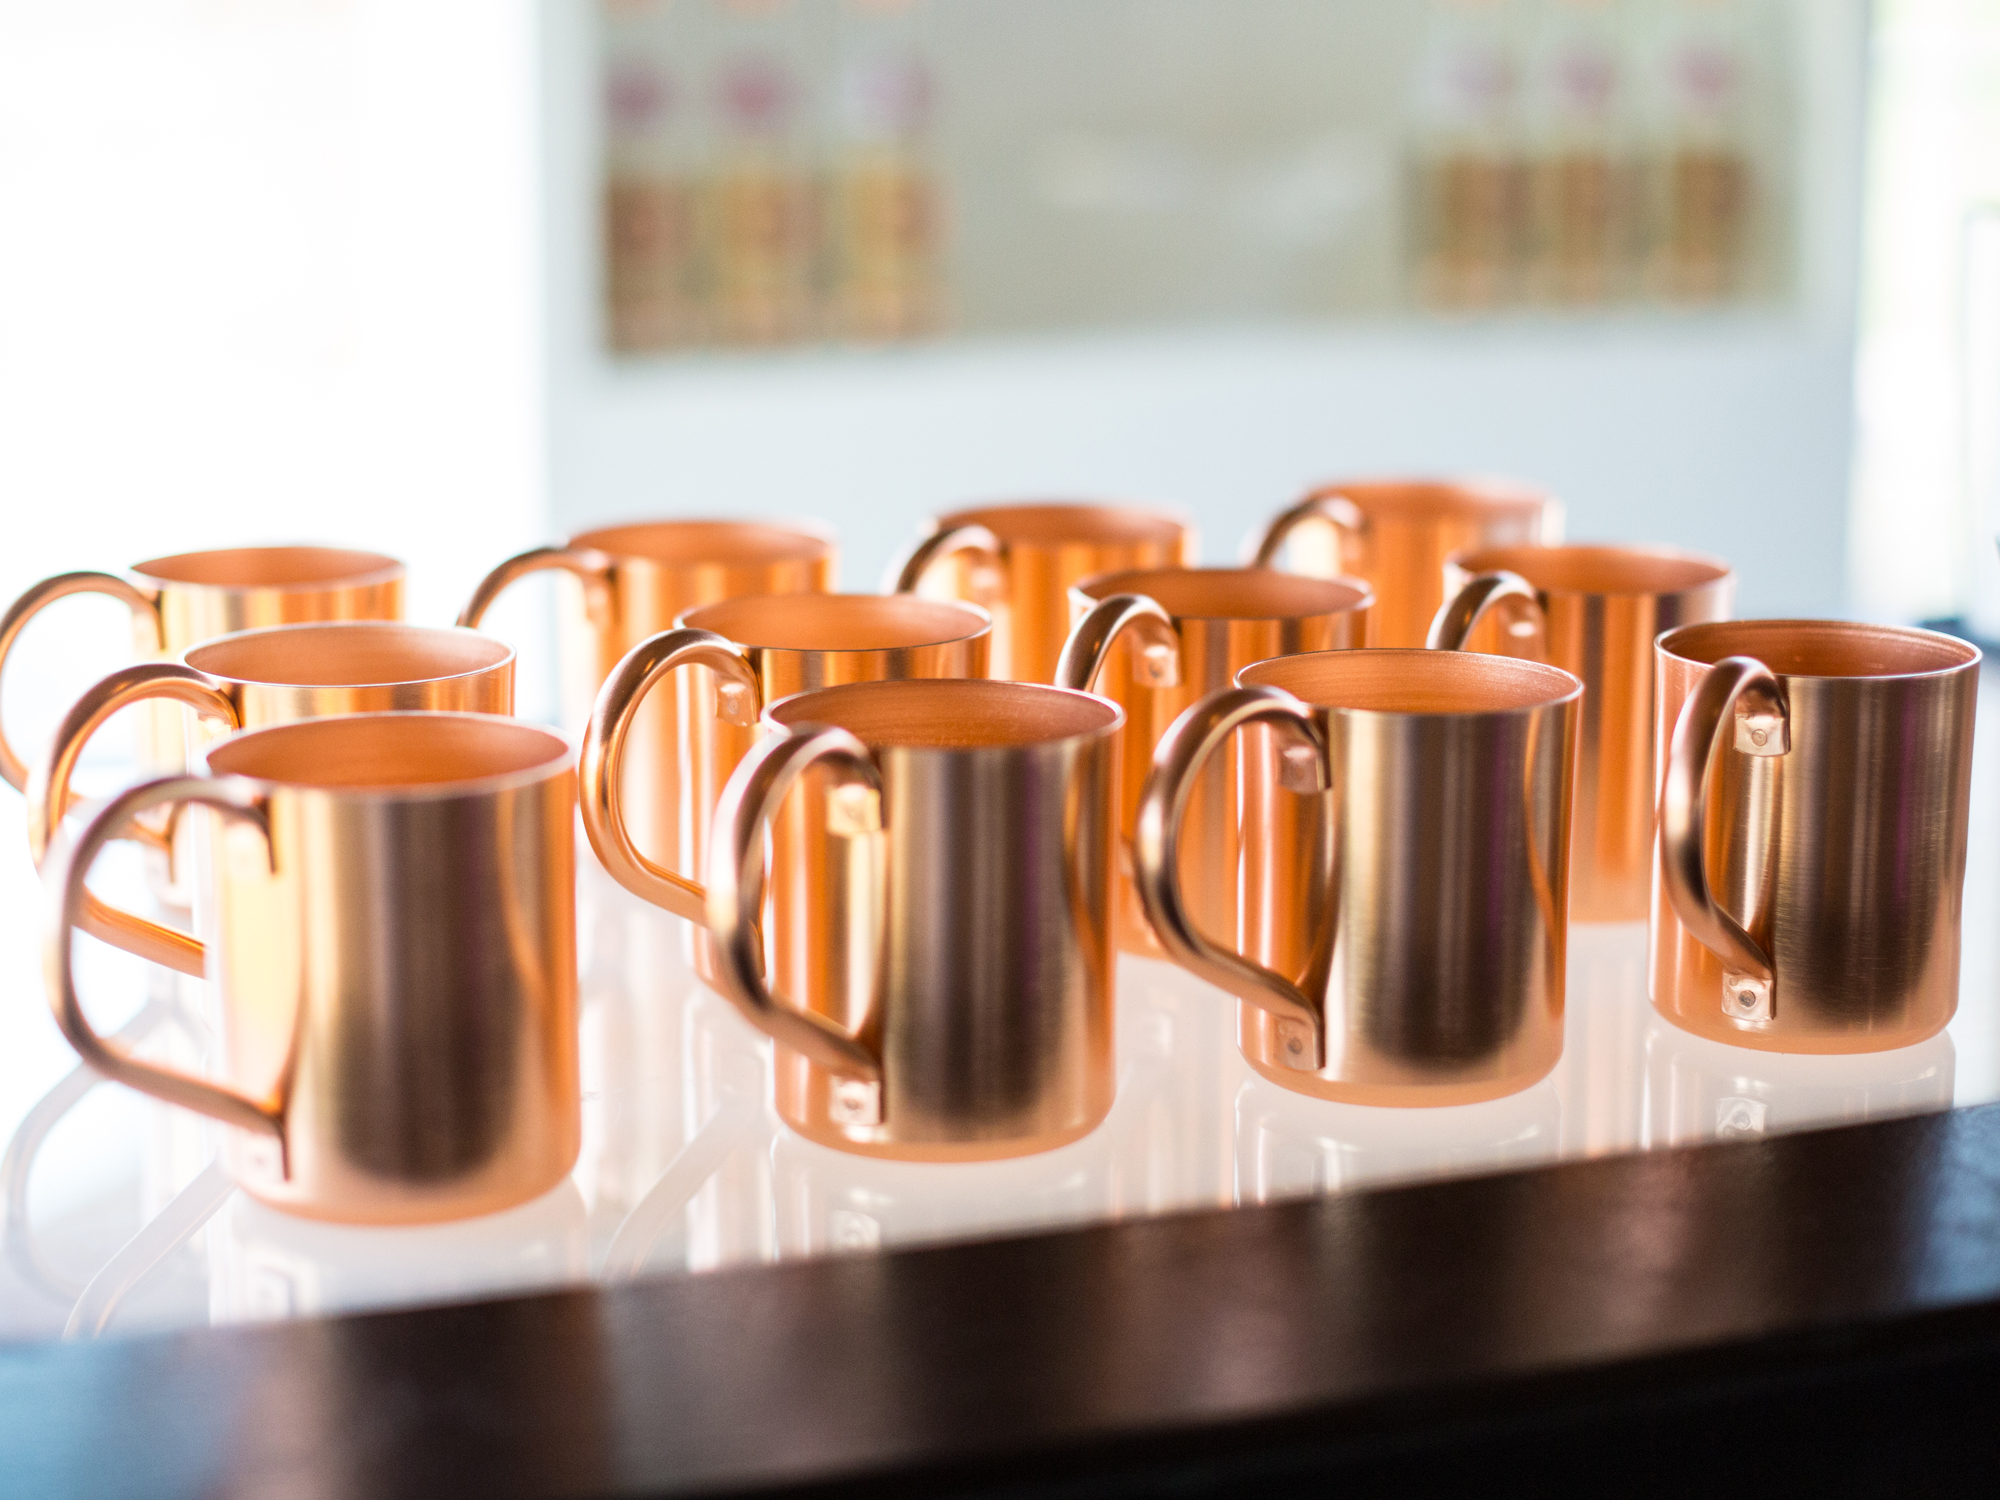 What’s so special about water from copper mugs?